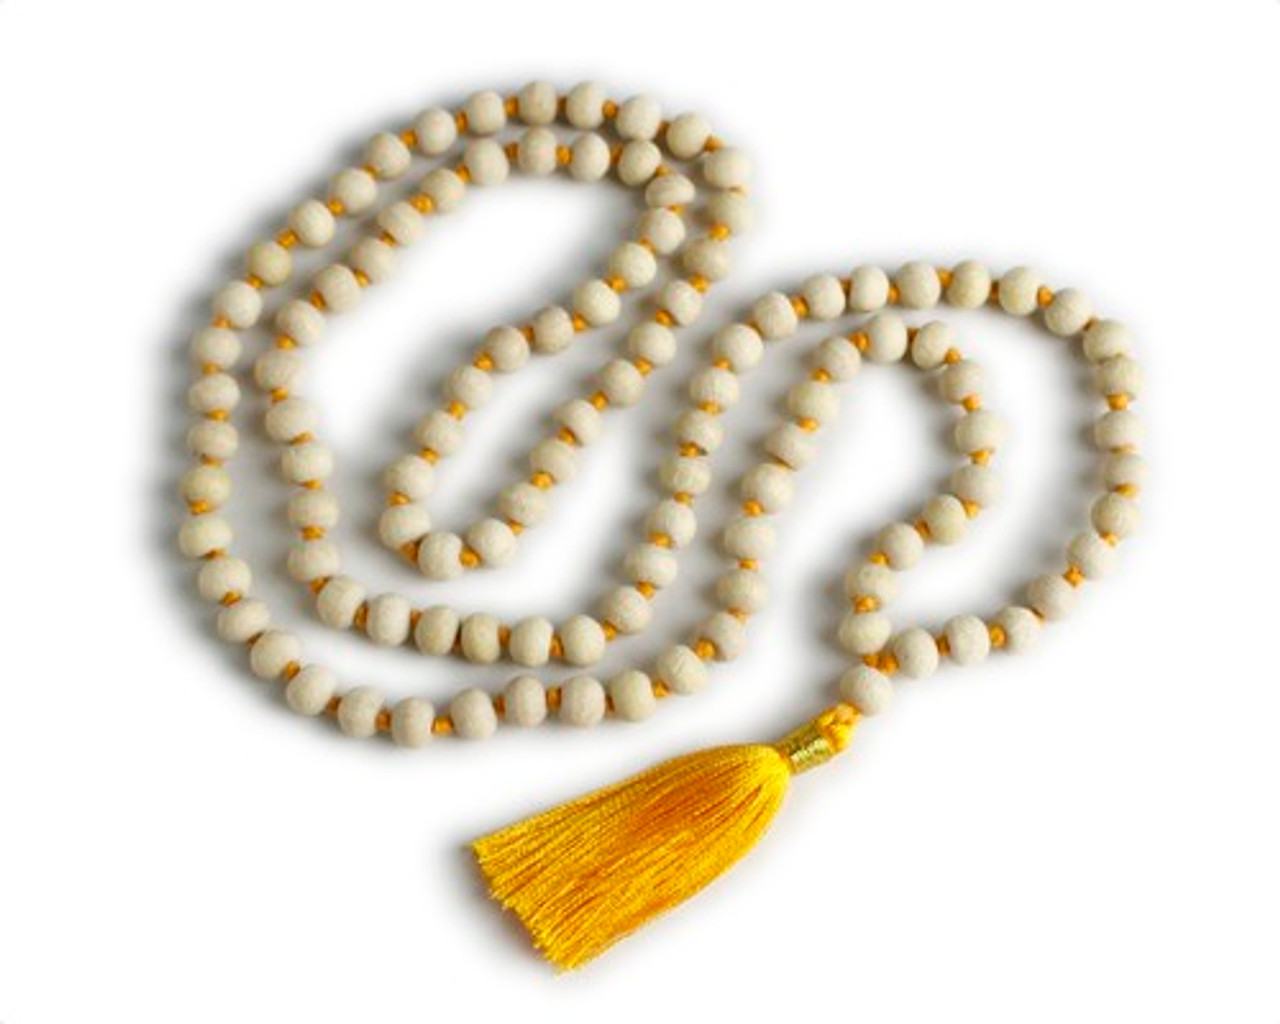 Composition of a Mala Necklace: What are the different parts of a mala